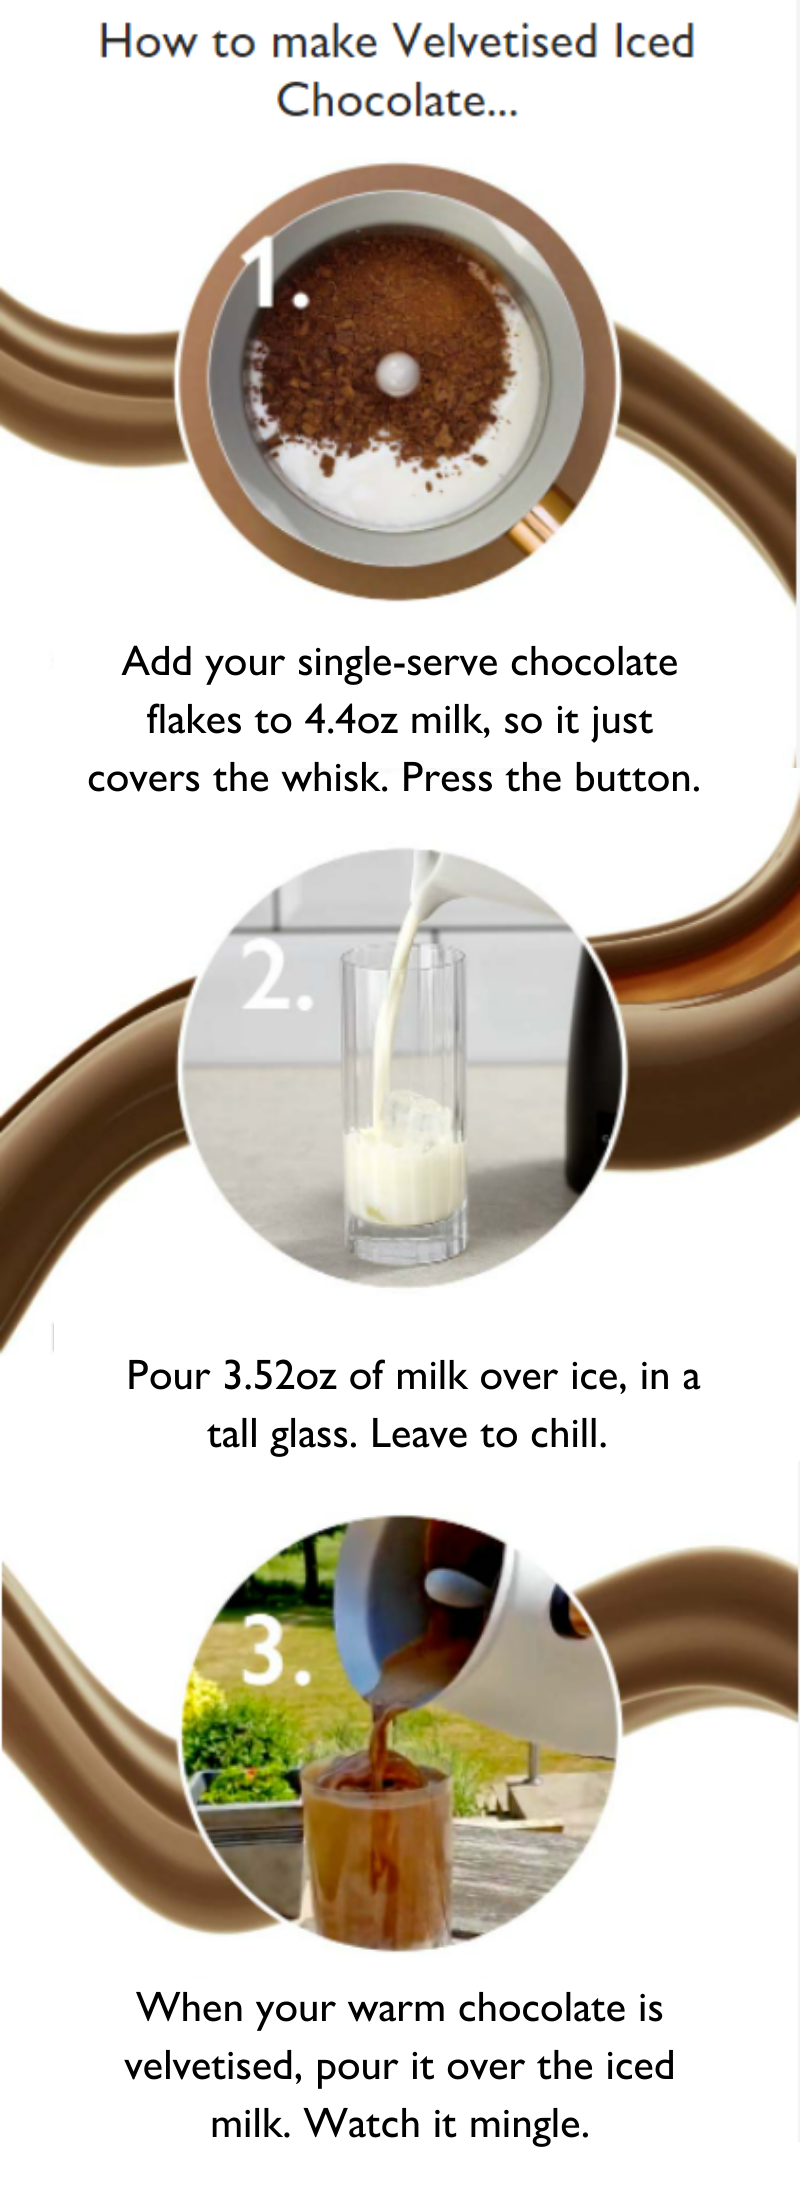 How to make Velvetised Iced Chocolate…Add your single-serve chocolate flakes to 4.4oz milk, so it just covers the whisk. Press the button. Pour 3.52oz of milk over ice, in a tall glass. Leave to chill. When your warm chocolate is velvetised, pour it over the iced milk. Watch it mingle.